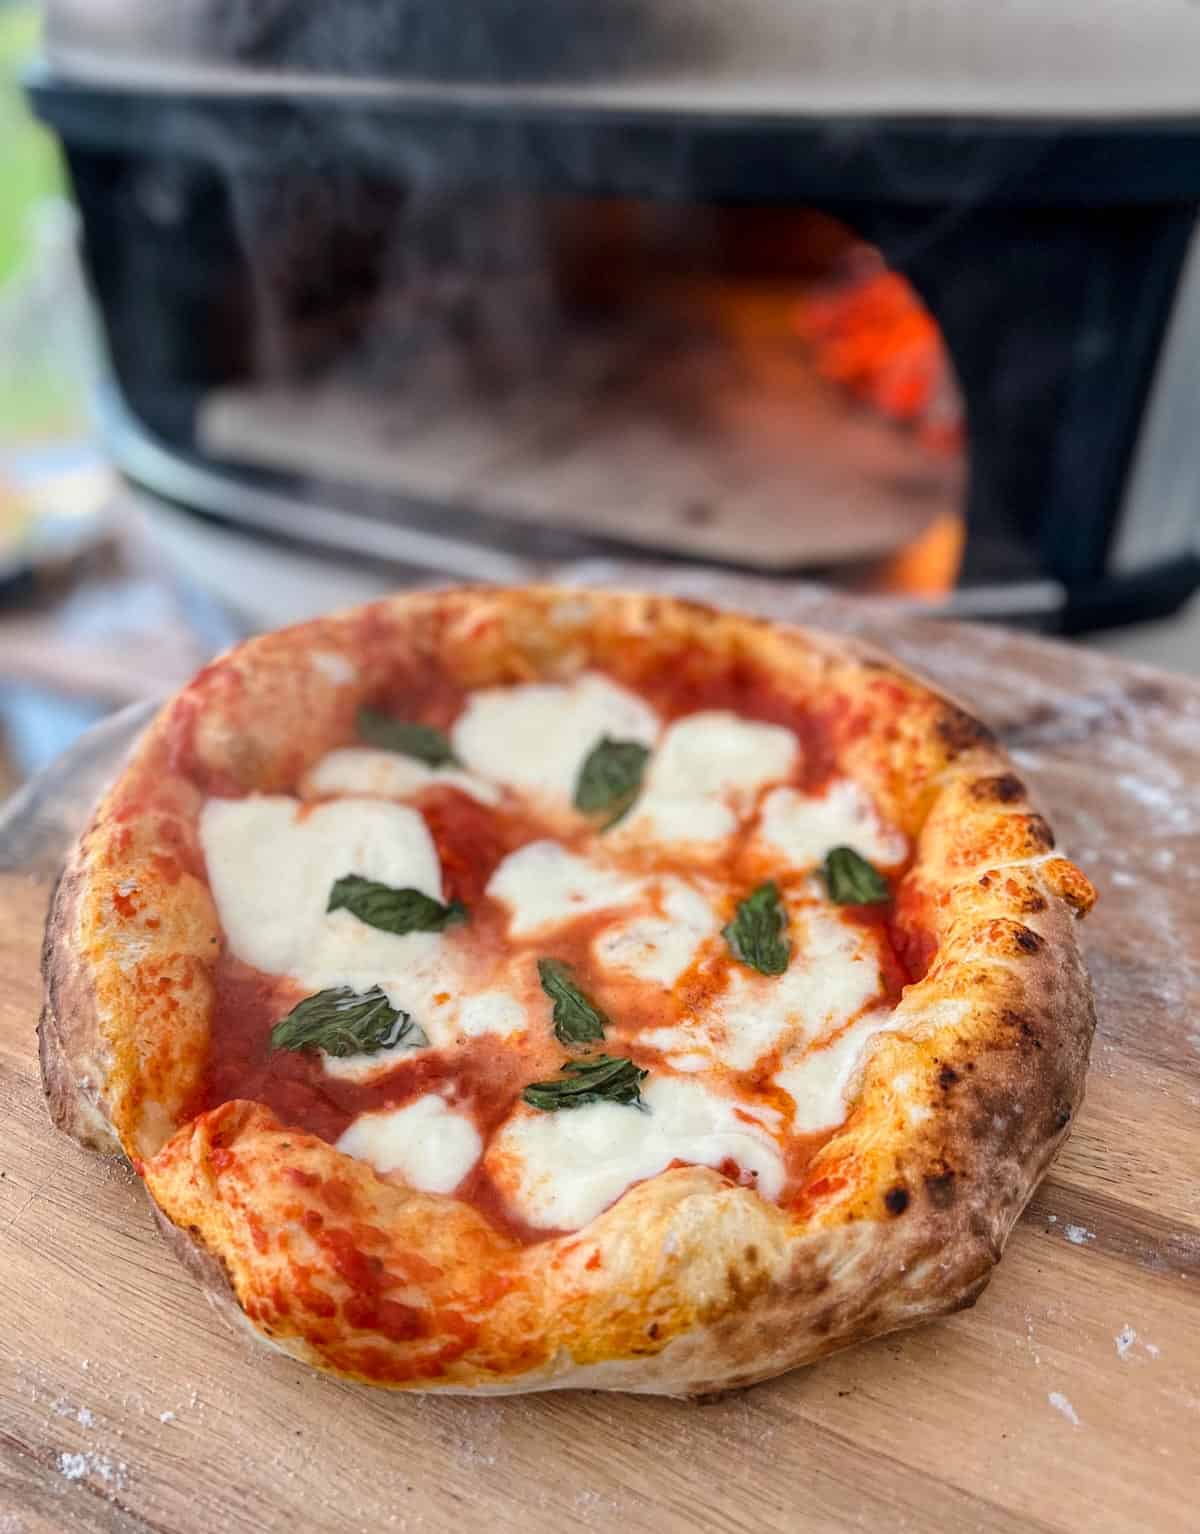 A Margherita Pizza cooked in a Gozney Dome wood fired pizza oven